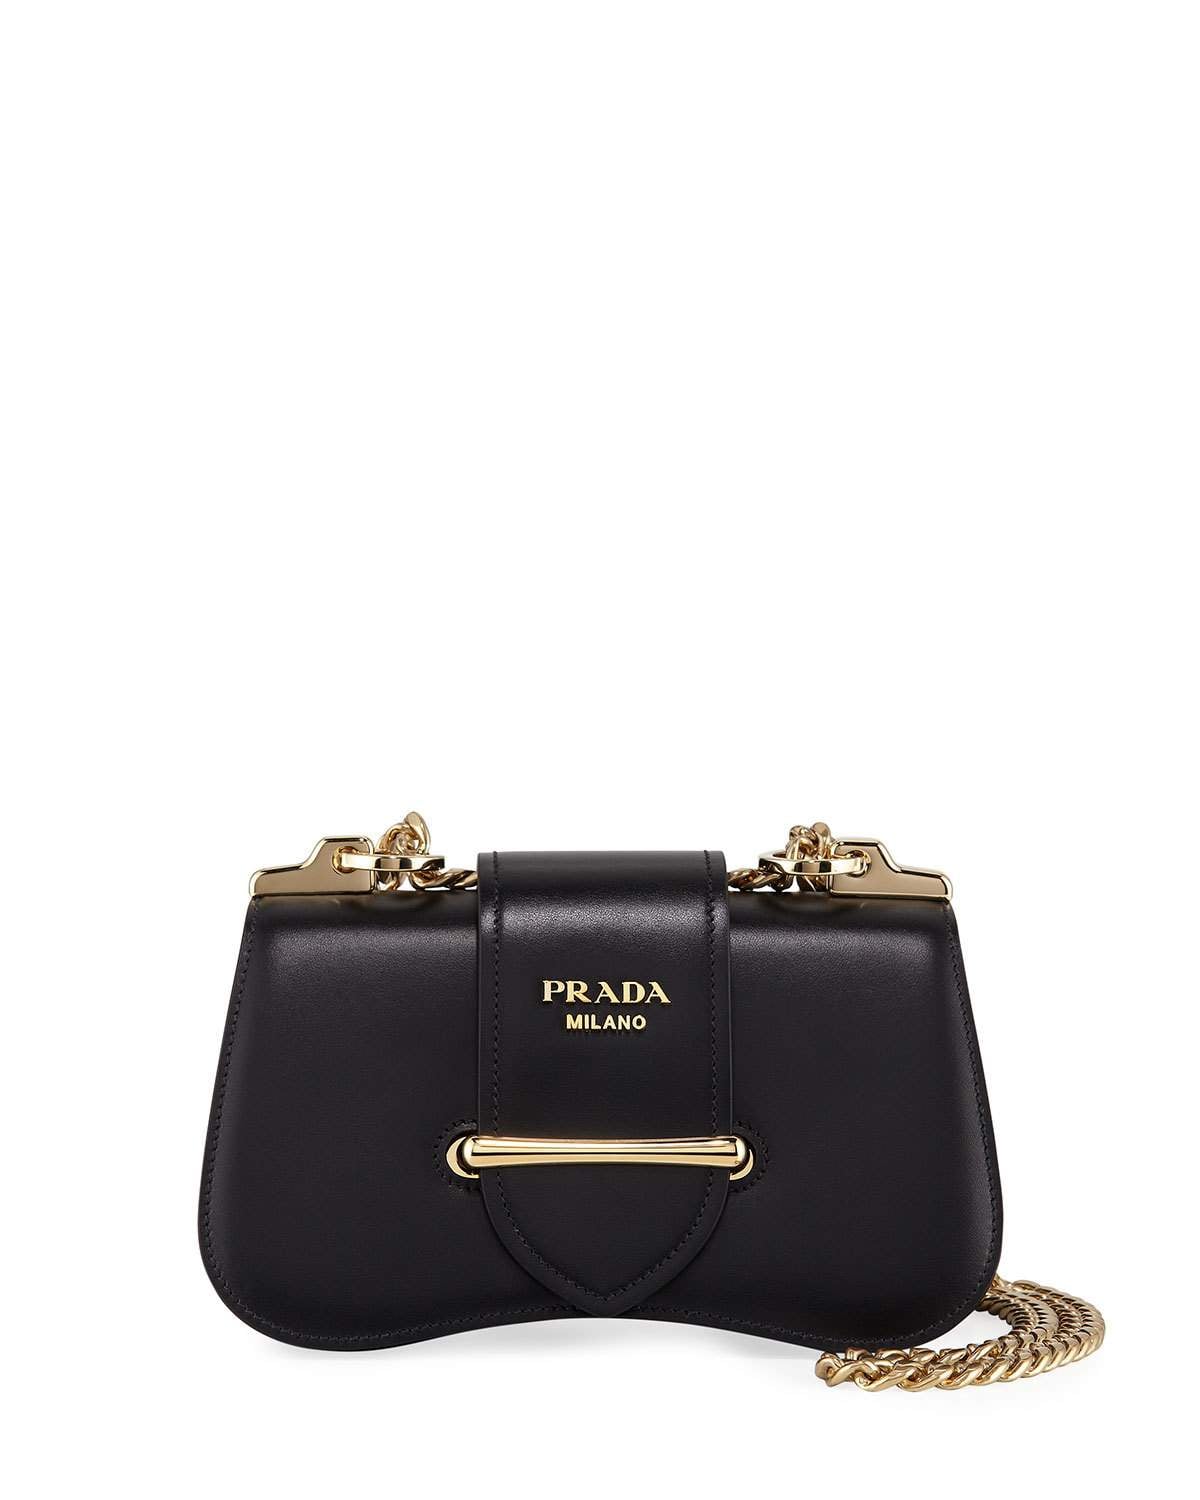 Prada Sidonie City Small Leather Shoulder Bag | Watch Out, Fendi Baguette;  This Is Becoming the Most Popular Bag of 2019 | POPSUGAR Fashion Photo 21